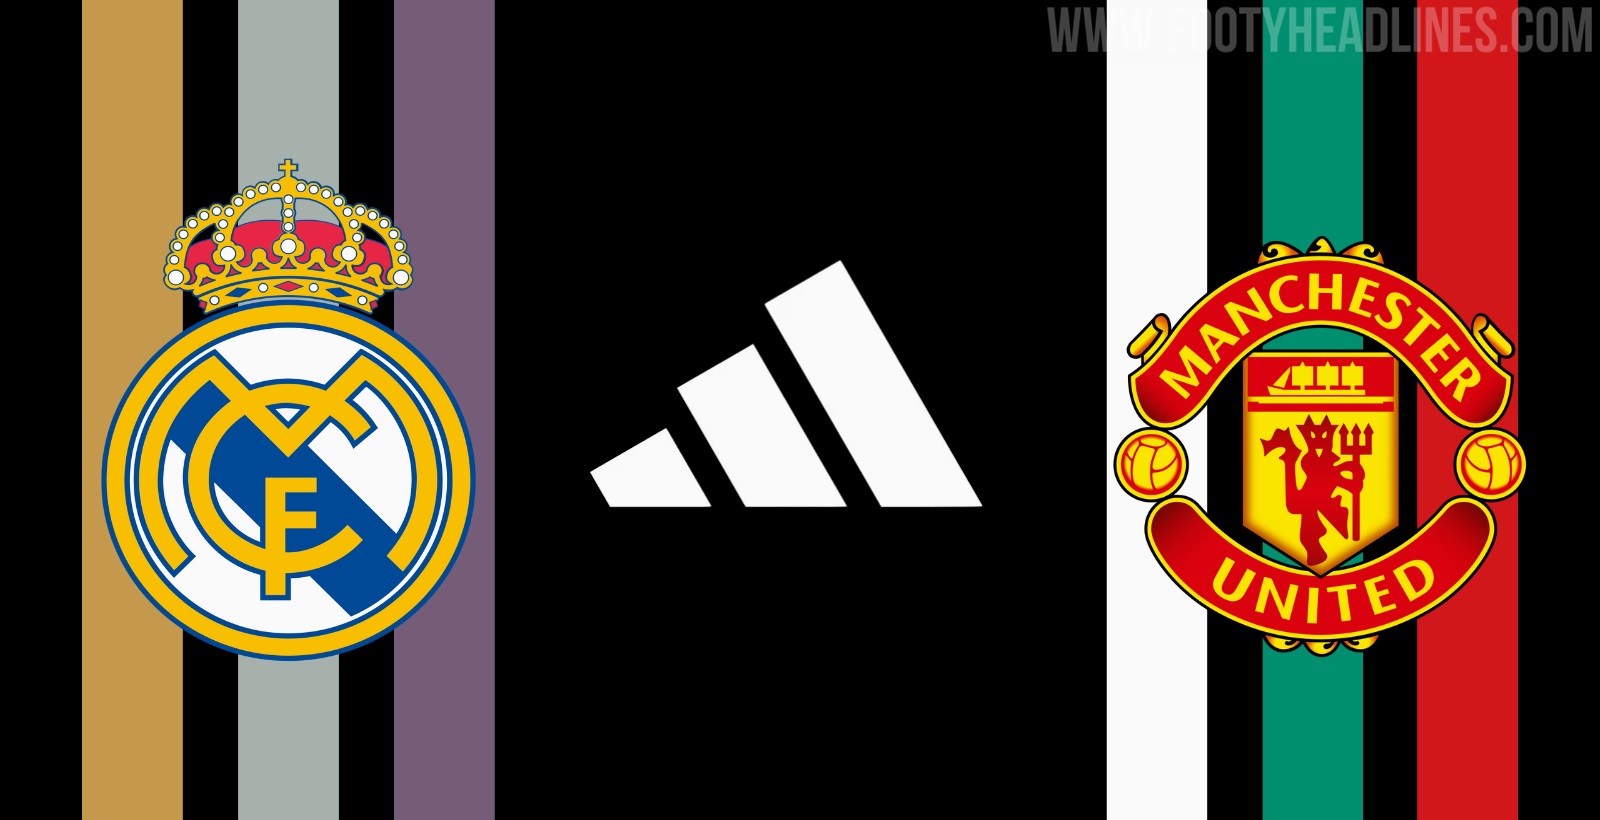 LEAKED: Adidas to Use Tricolor Stripes For Real Madrid and